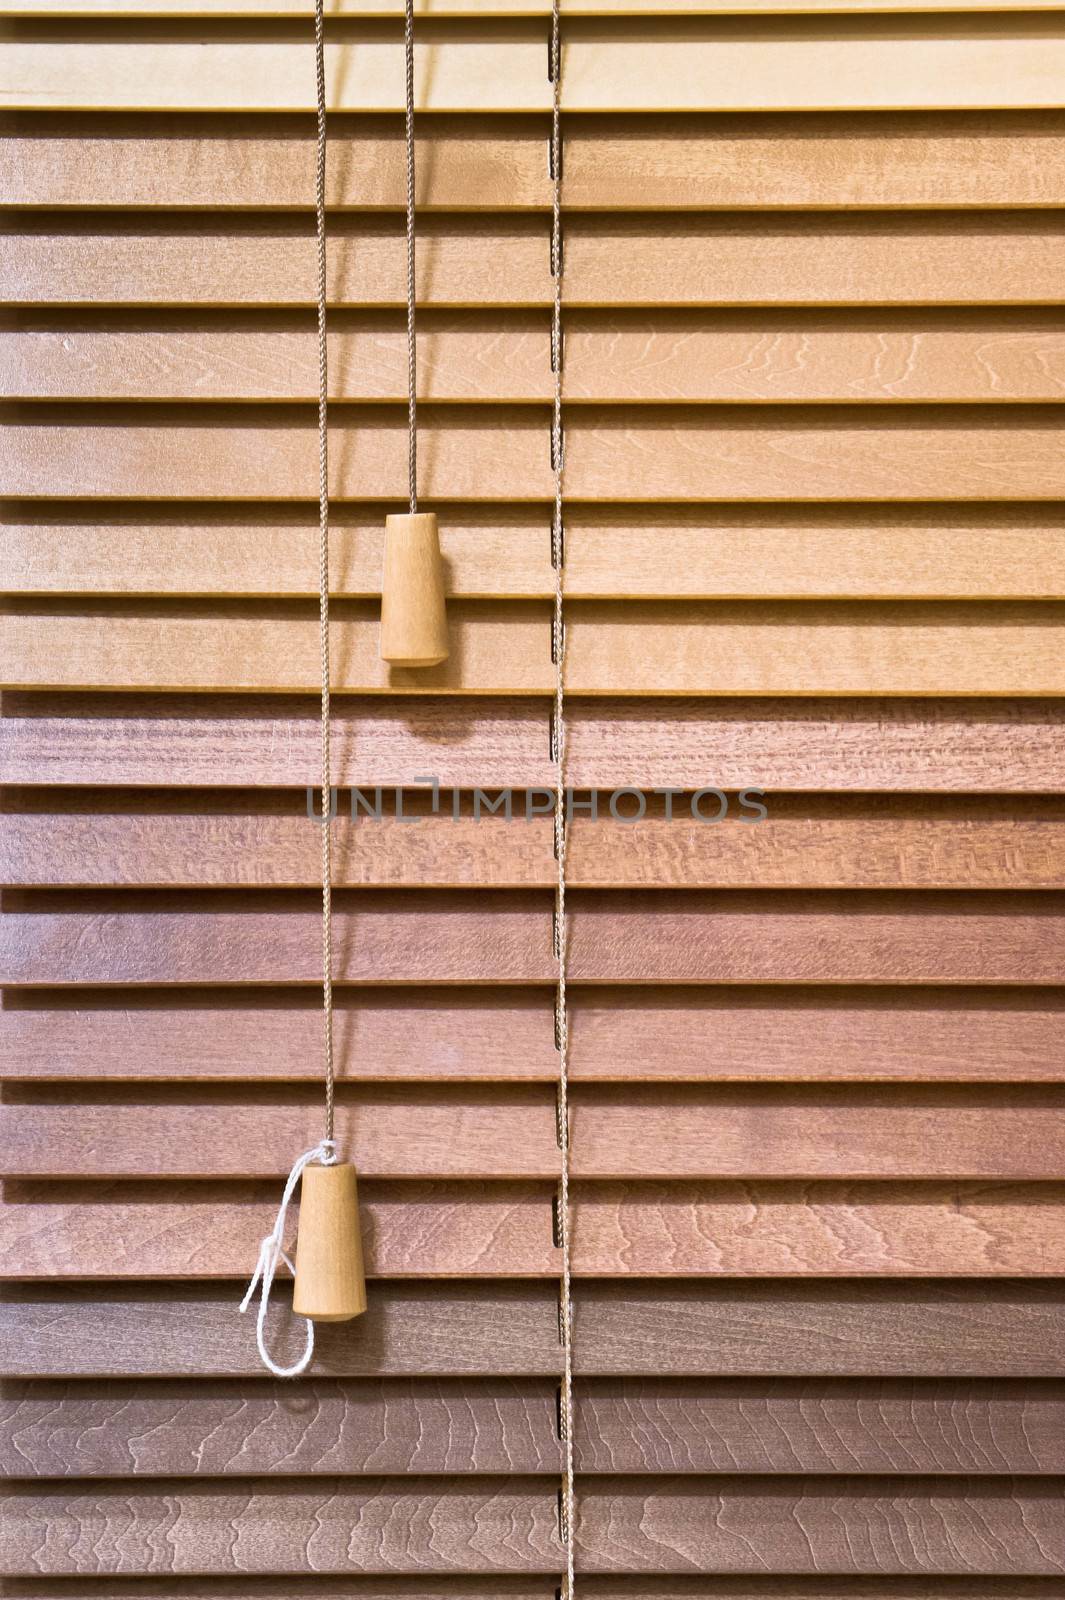 Wooden venetian blind as a background